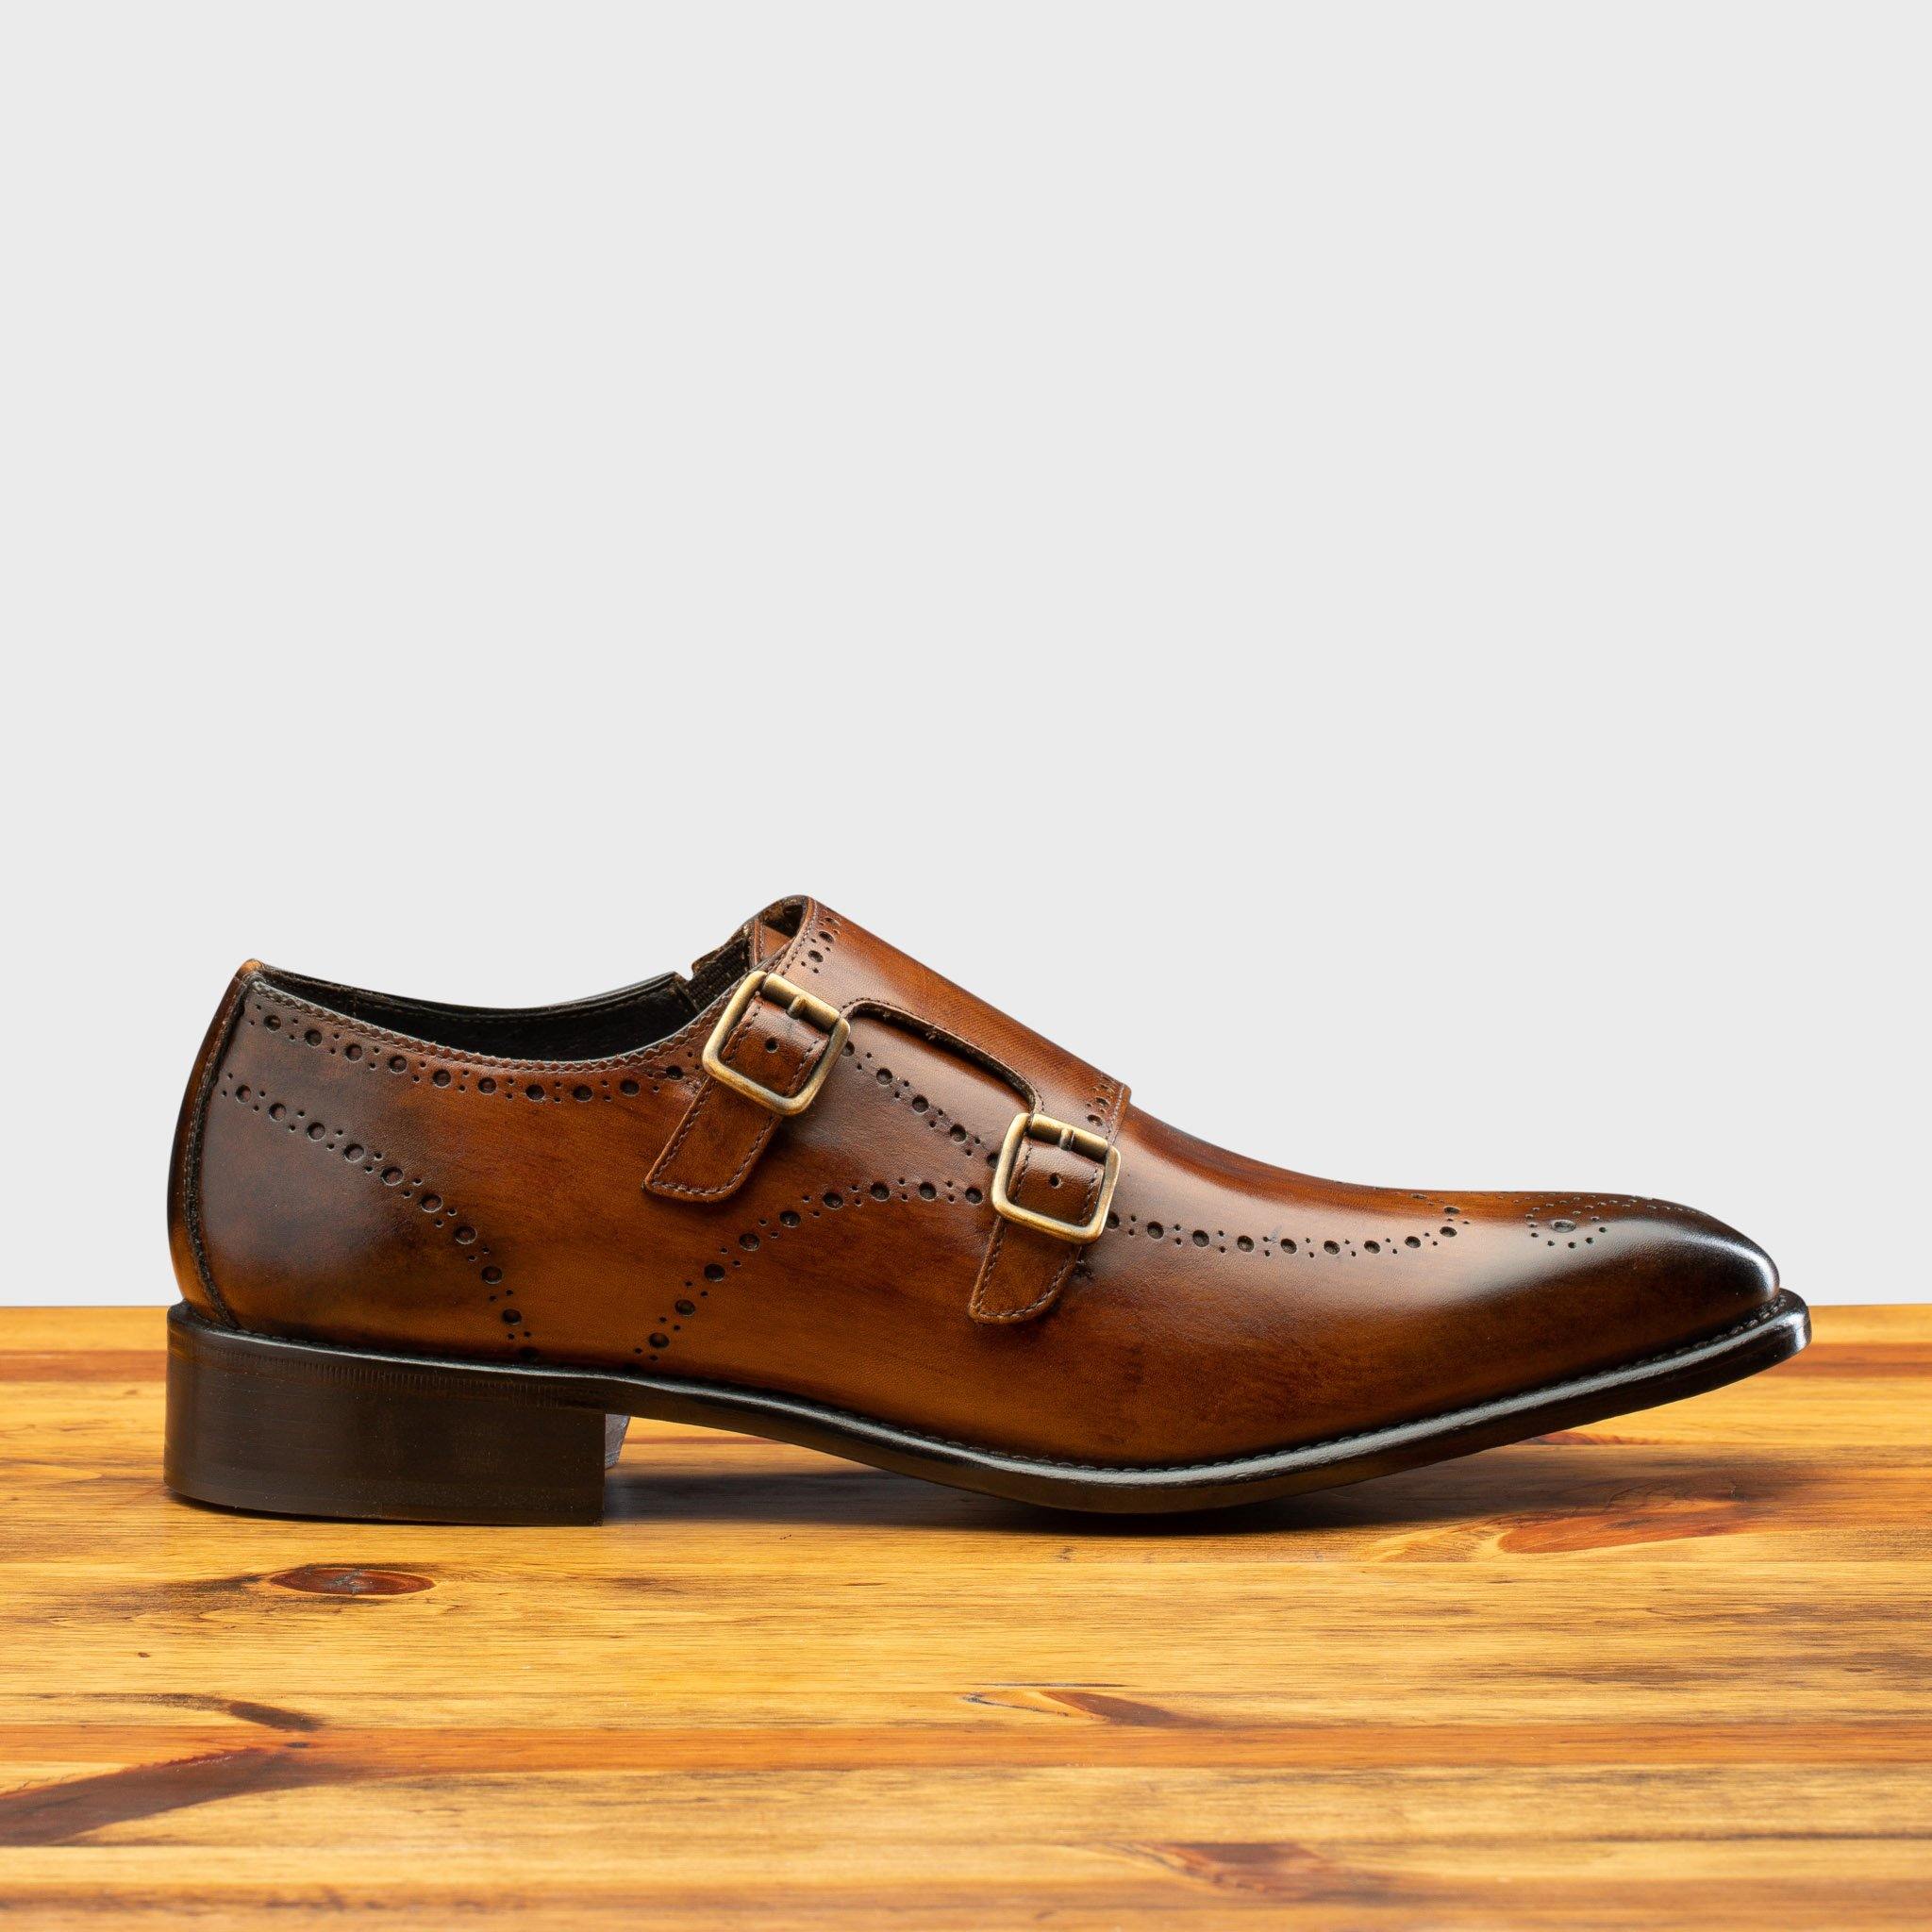 Side profile of 8863 Calzoleria Toscana Chestnut Cayenne Calf Double Monkstrap on top of a wooden table